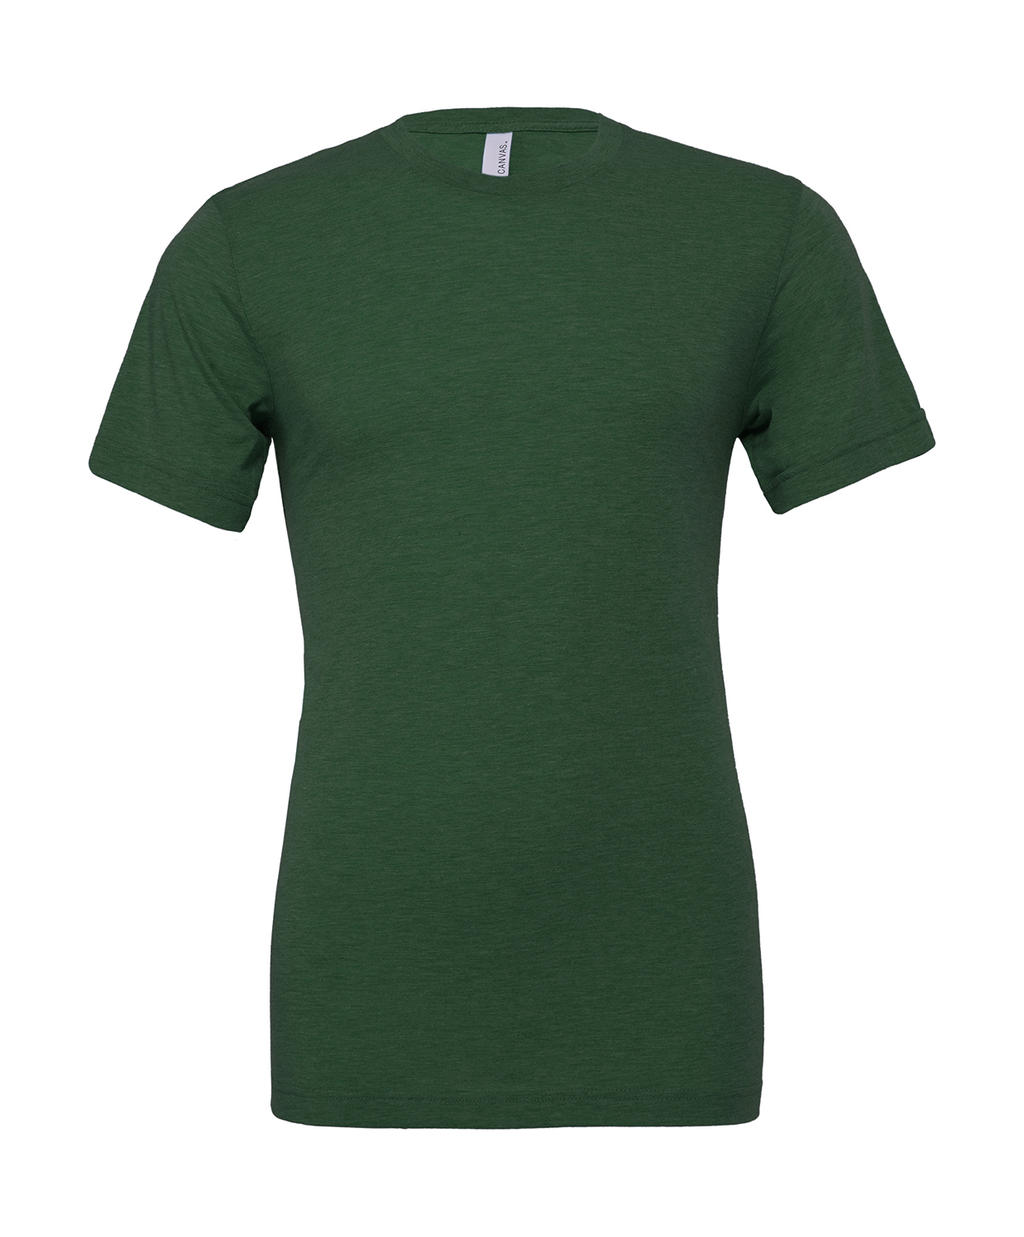  Unisex Triblend Short Sleeve Tee in Farbe Grass Green Triblend 